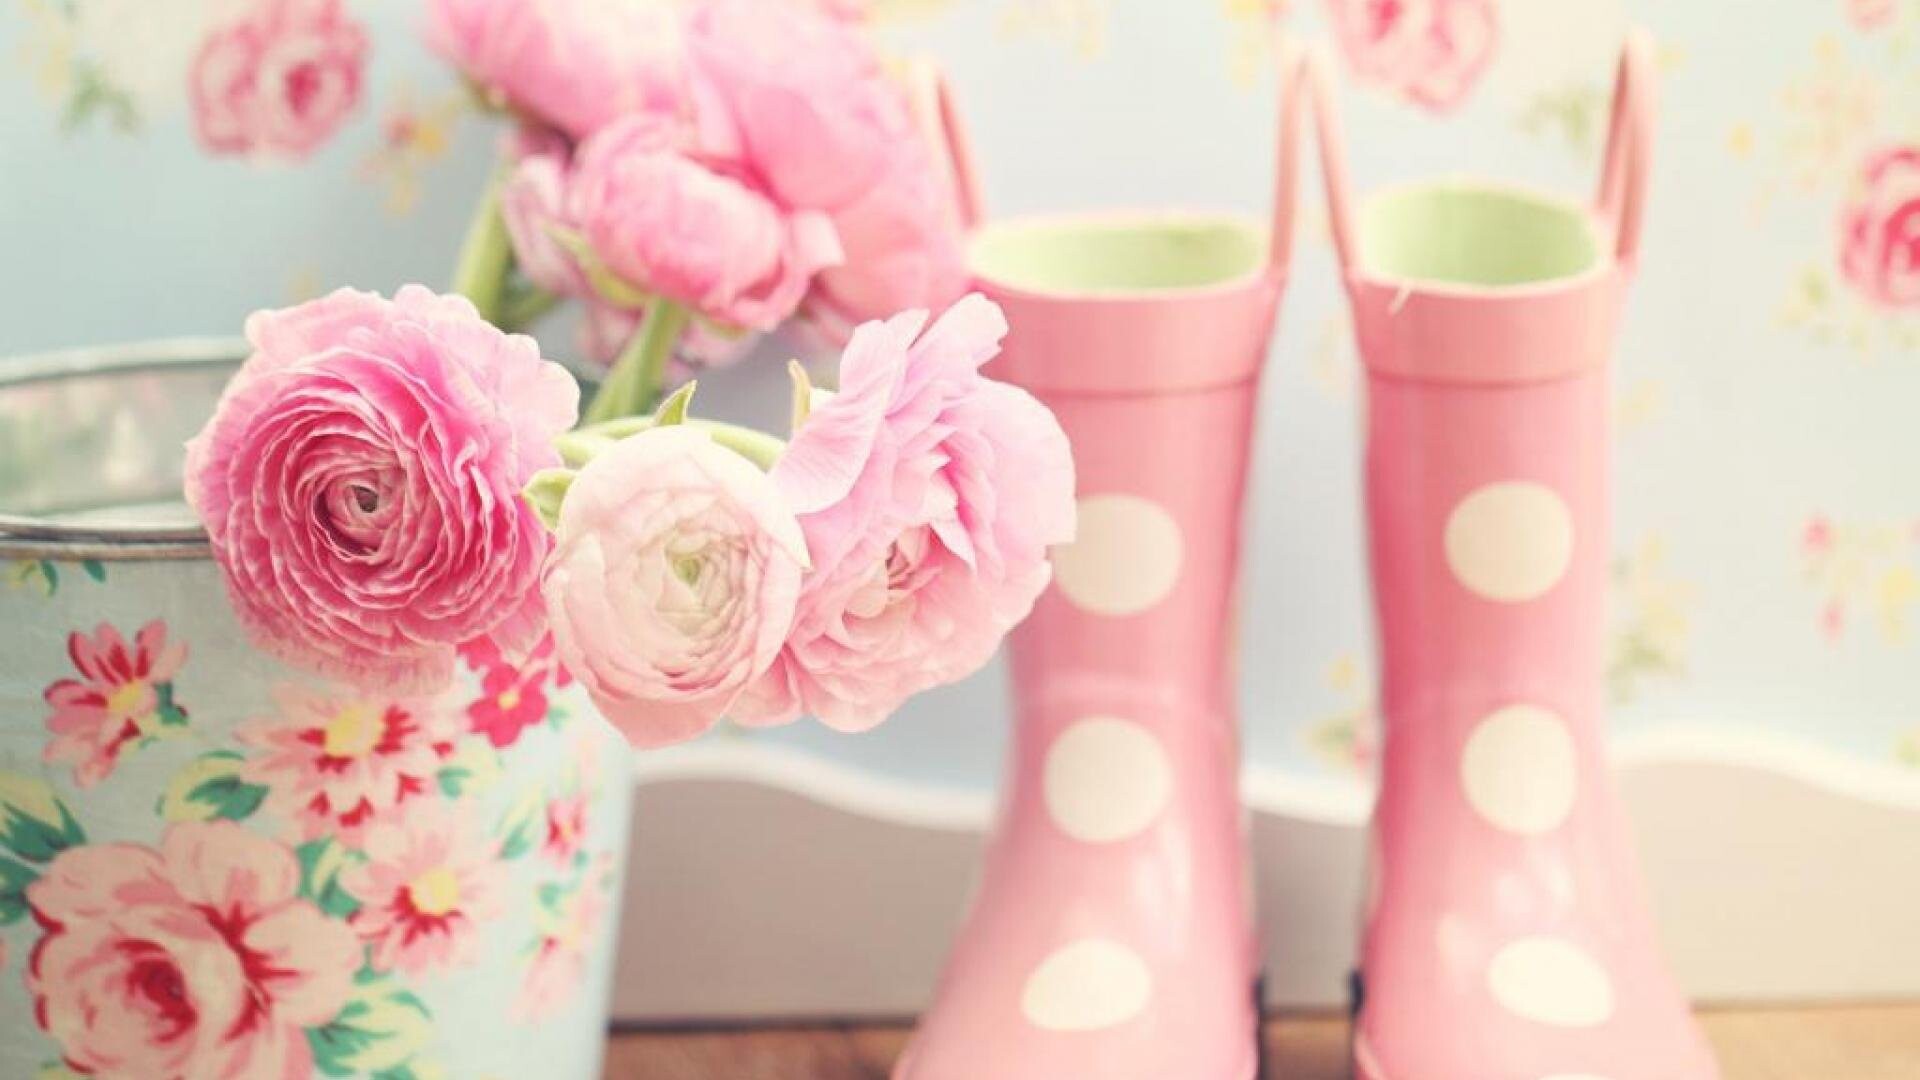 Girly: A beautiful charm, Roses in the vase, Pink boot shaped bowls. 1920x1080 Full HD Background.